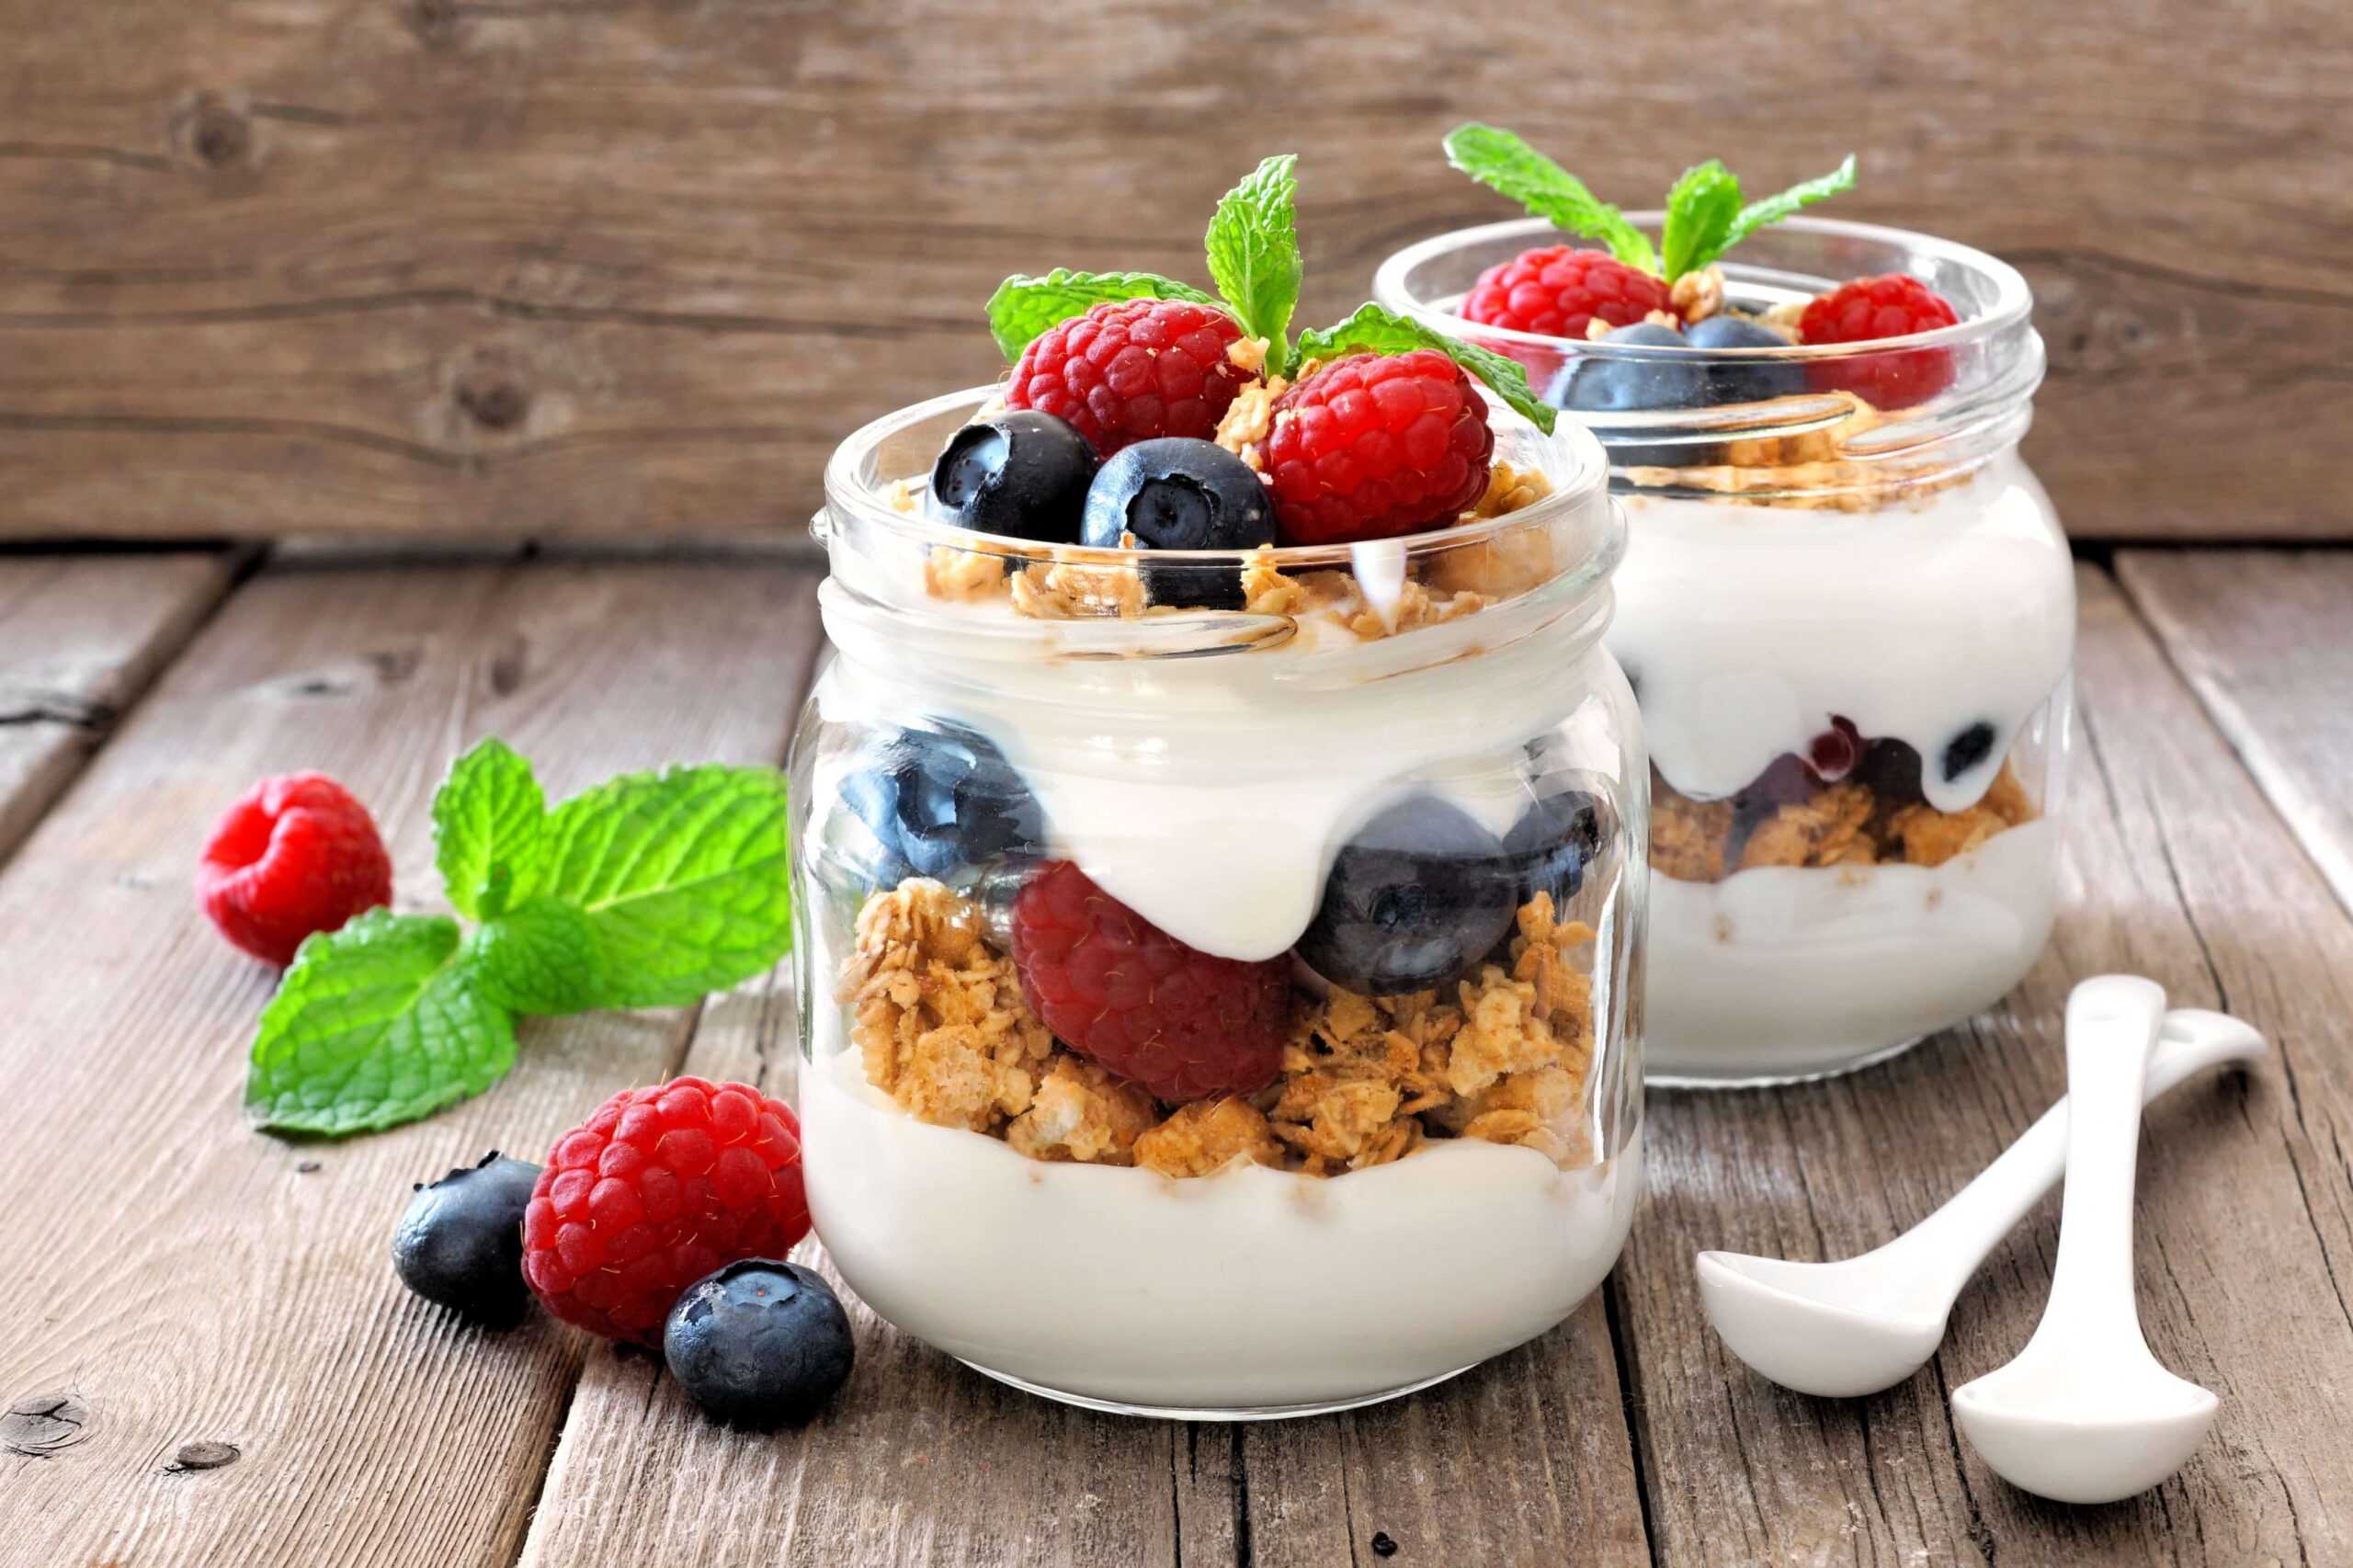 How many calories in a Greek yogurt parfait with granola?